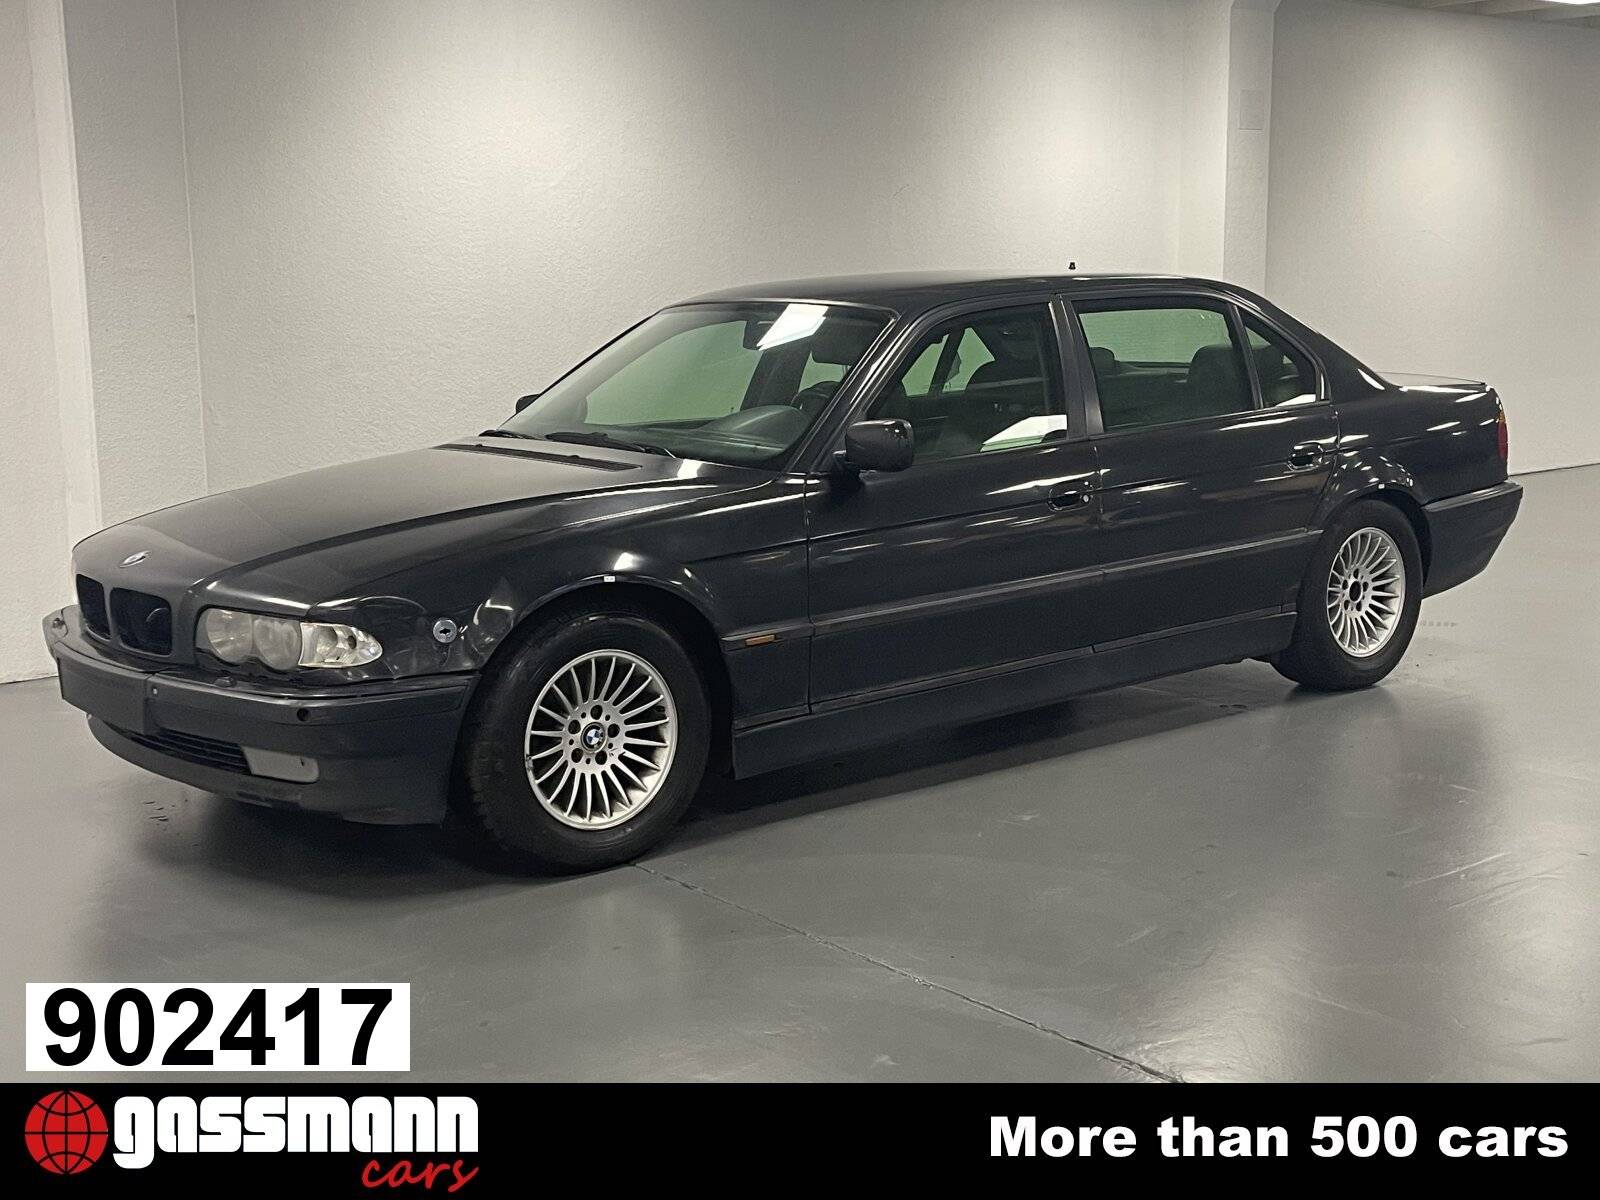 BMW 7 Series E38 Classic Cars for Sale - Classic Trader